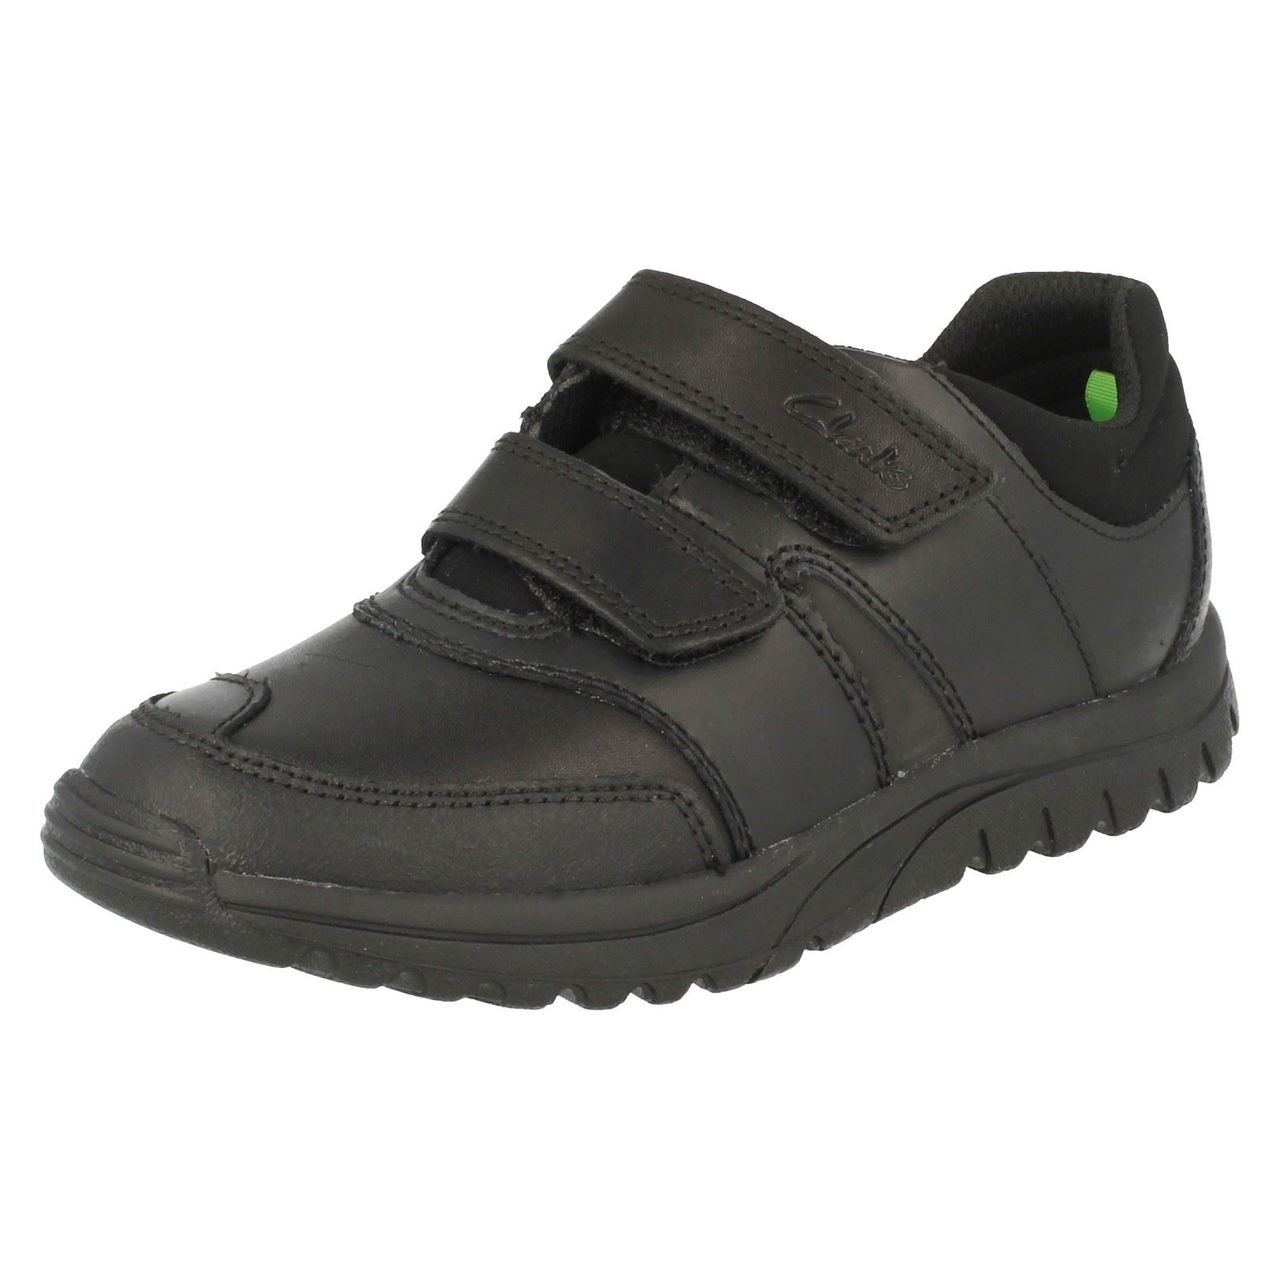 clarks shoes for toddlers